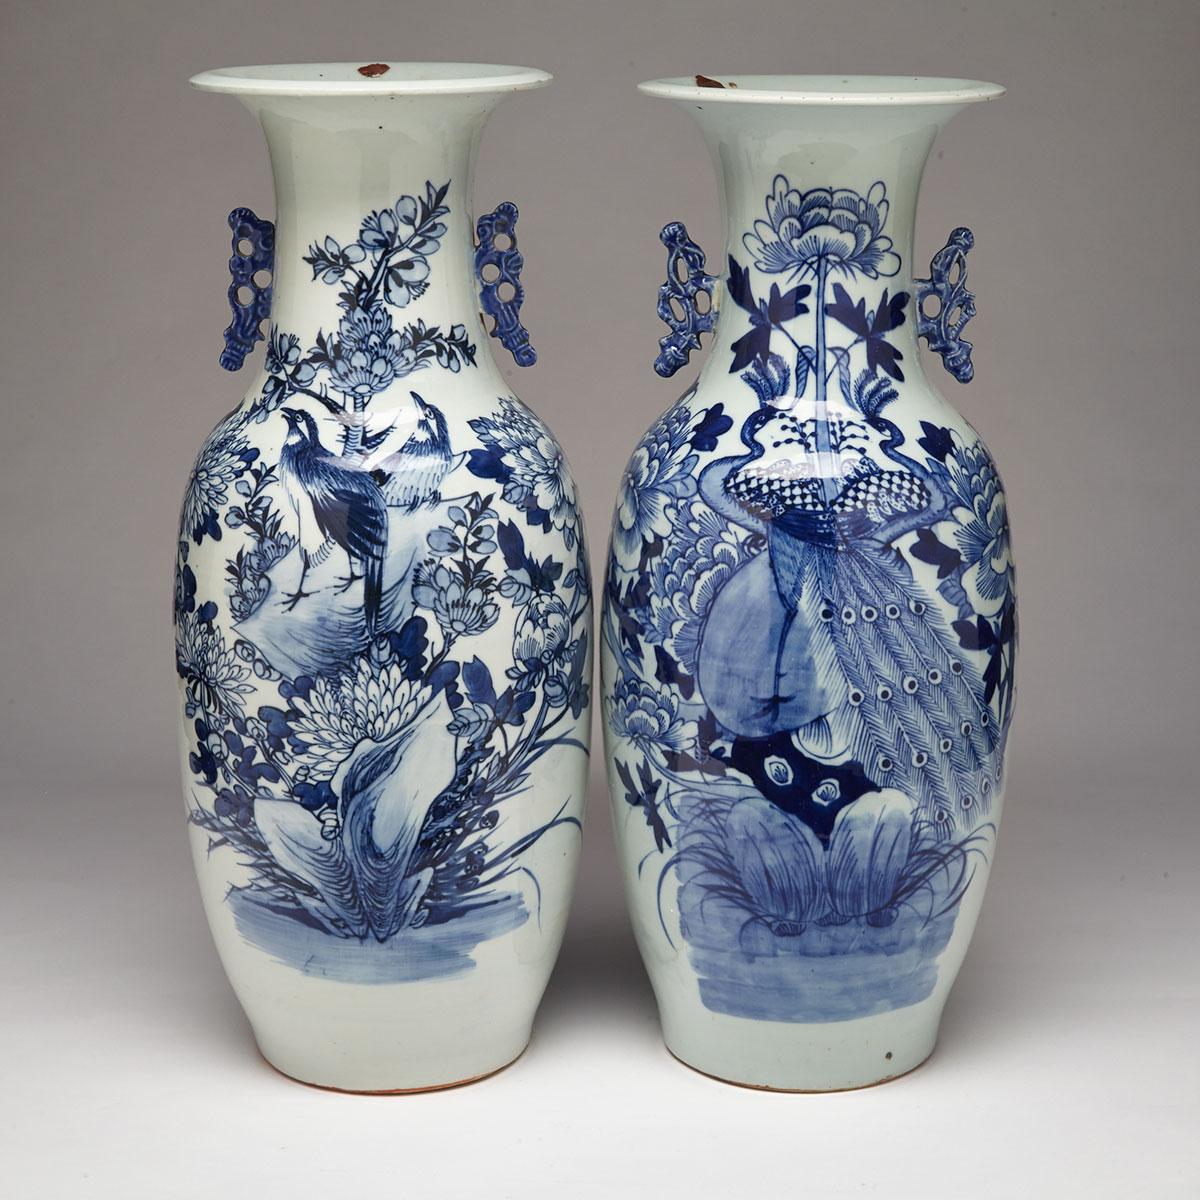 Pair of Large Blue and White Fauna Vases, Republican Period